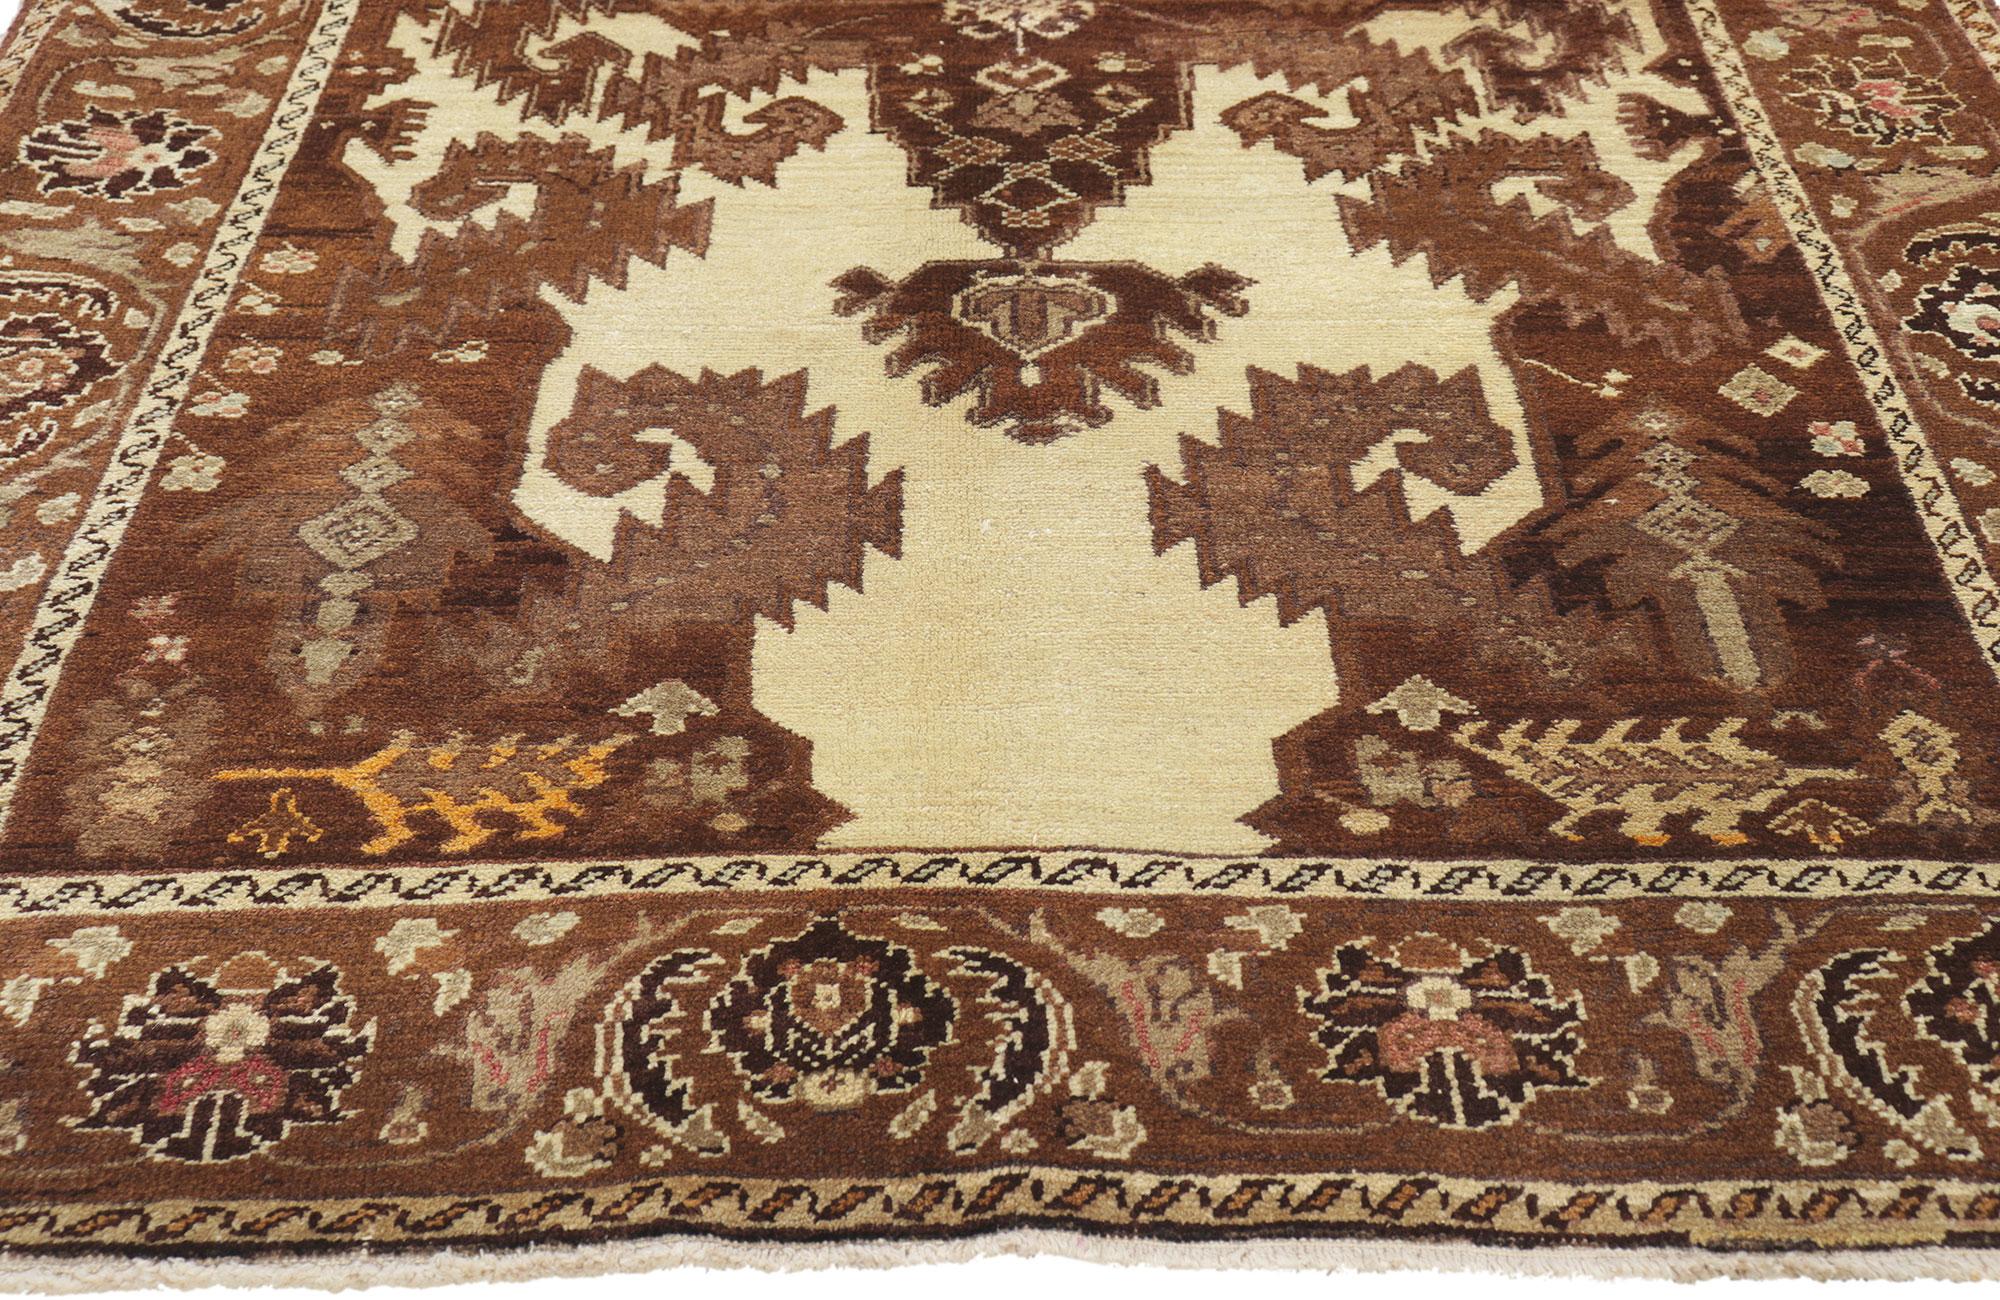 Vintage Turkish Oushak Rug, Timeless Elegance Meets Mid-Century Modern Style In Good Condition For Sale In Dallas, TX